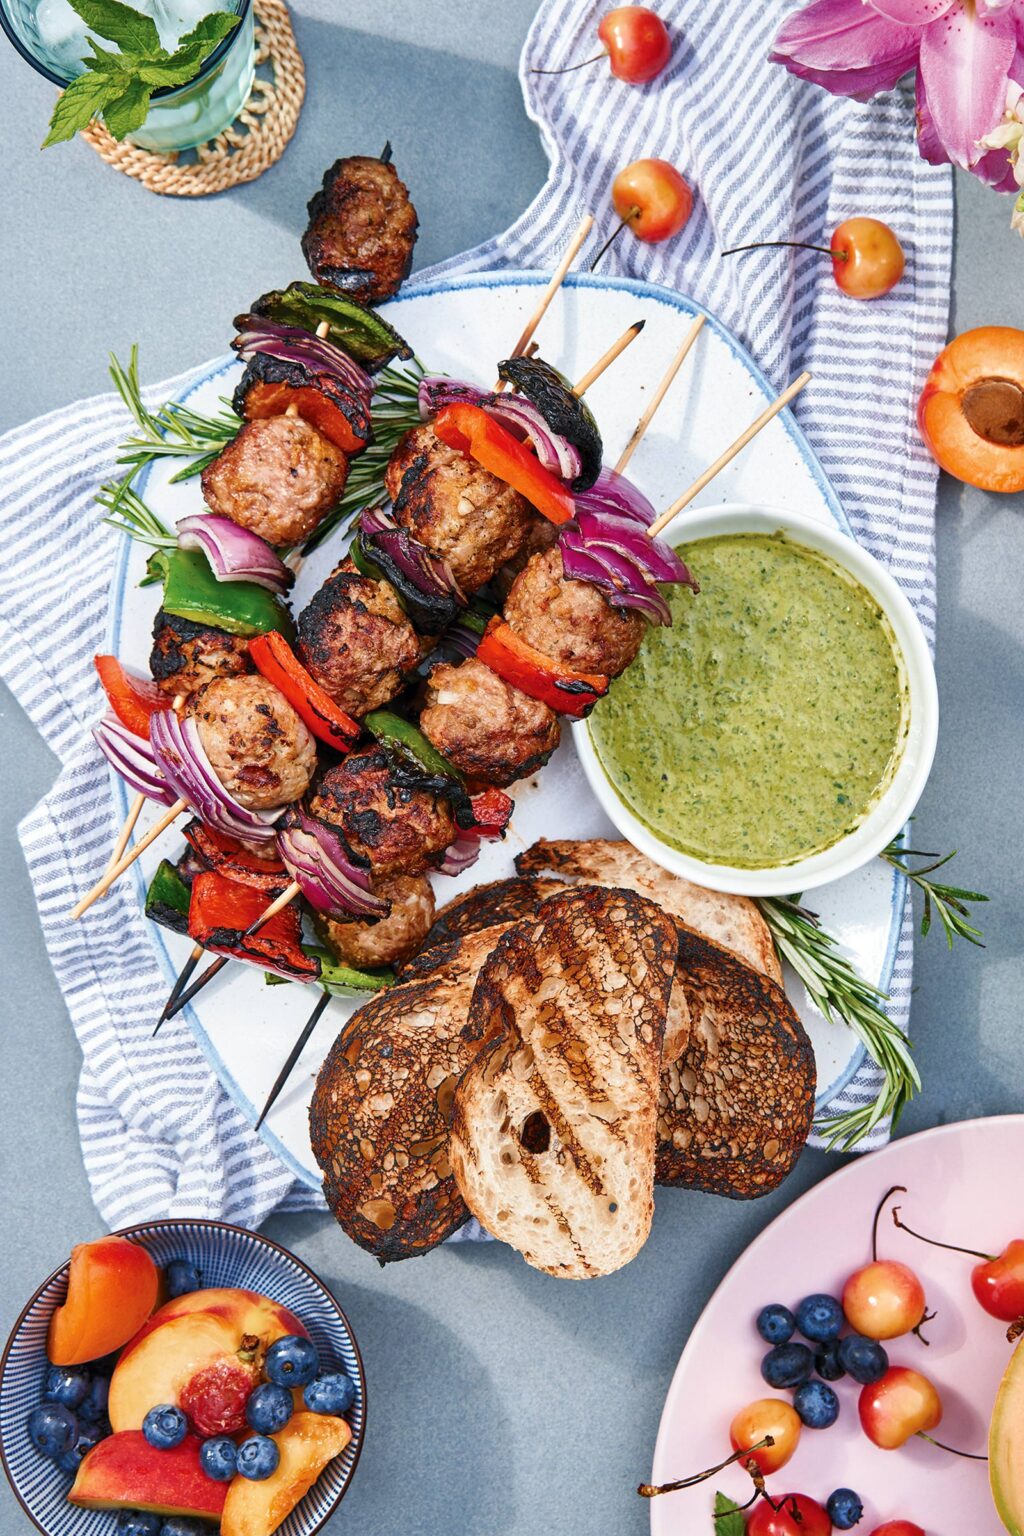 WSMAG.NET BLOG | Fresh Summer Flavors with Two Grilled Grass-Fed Lamb ...